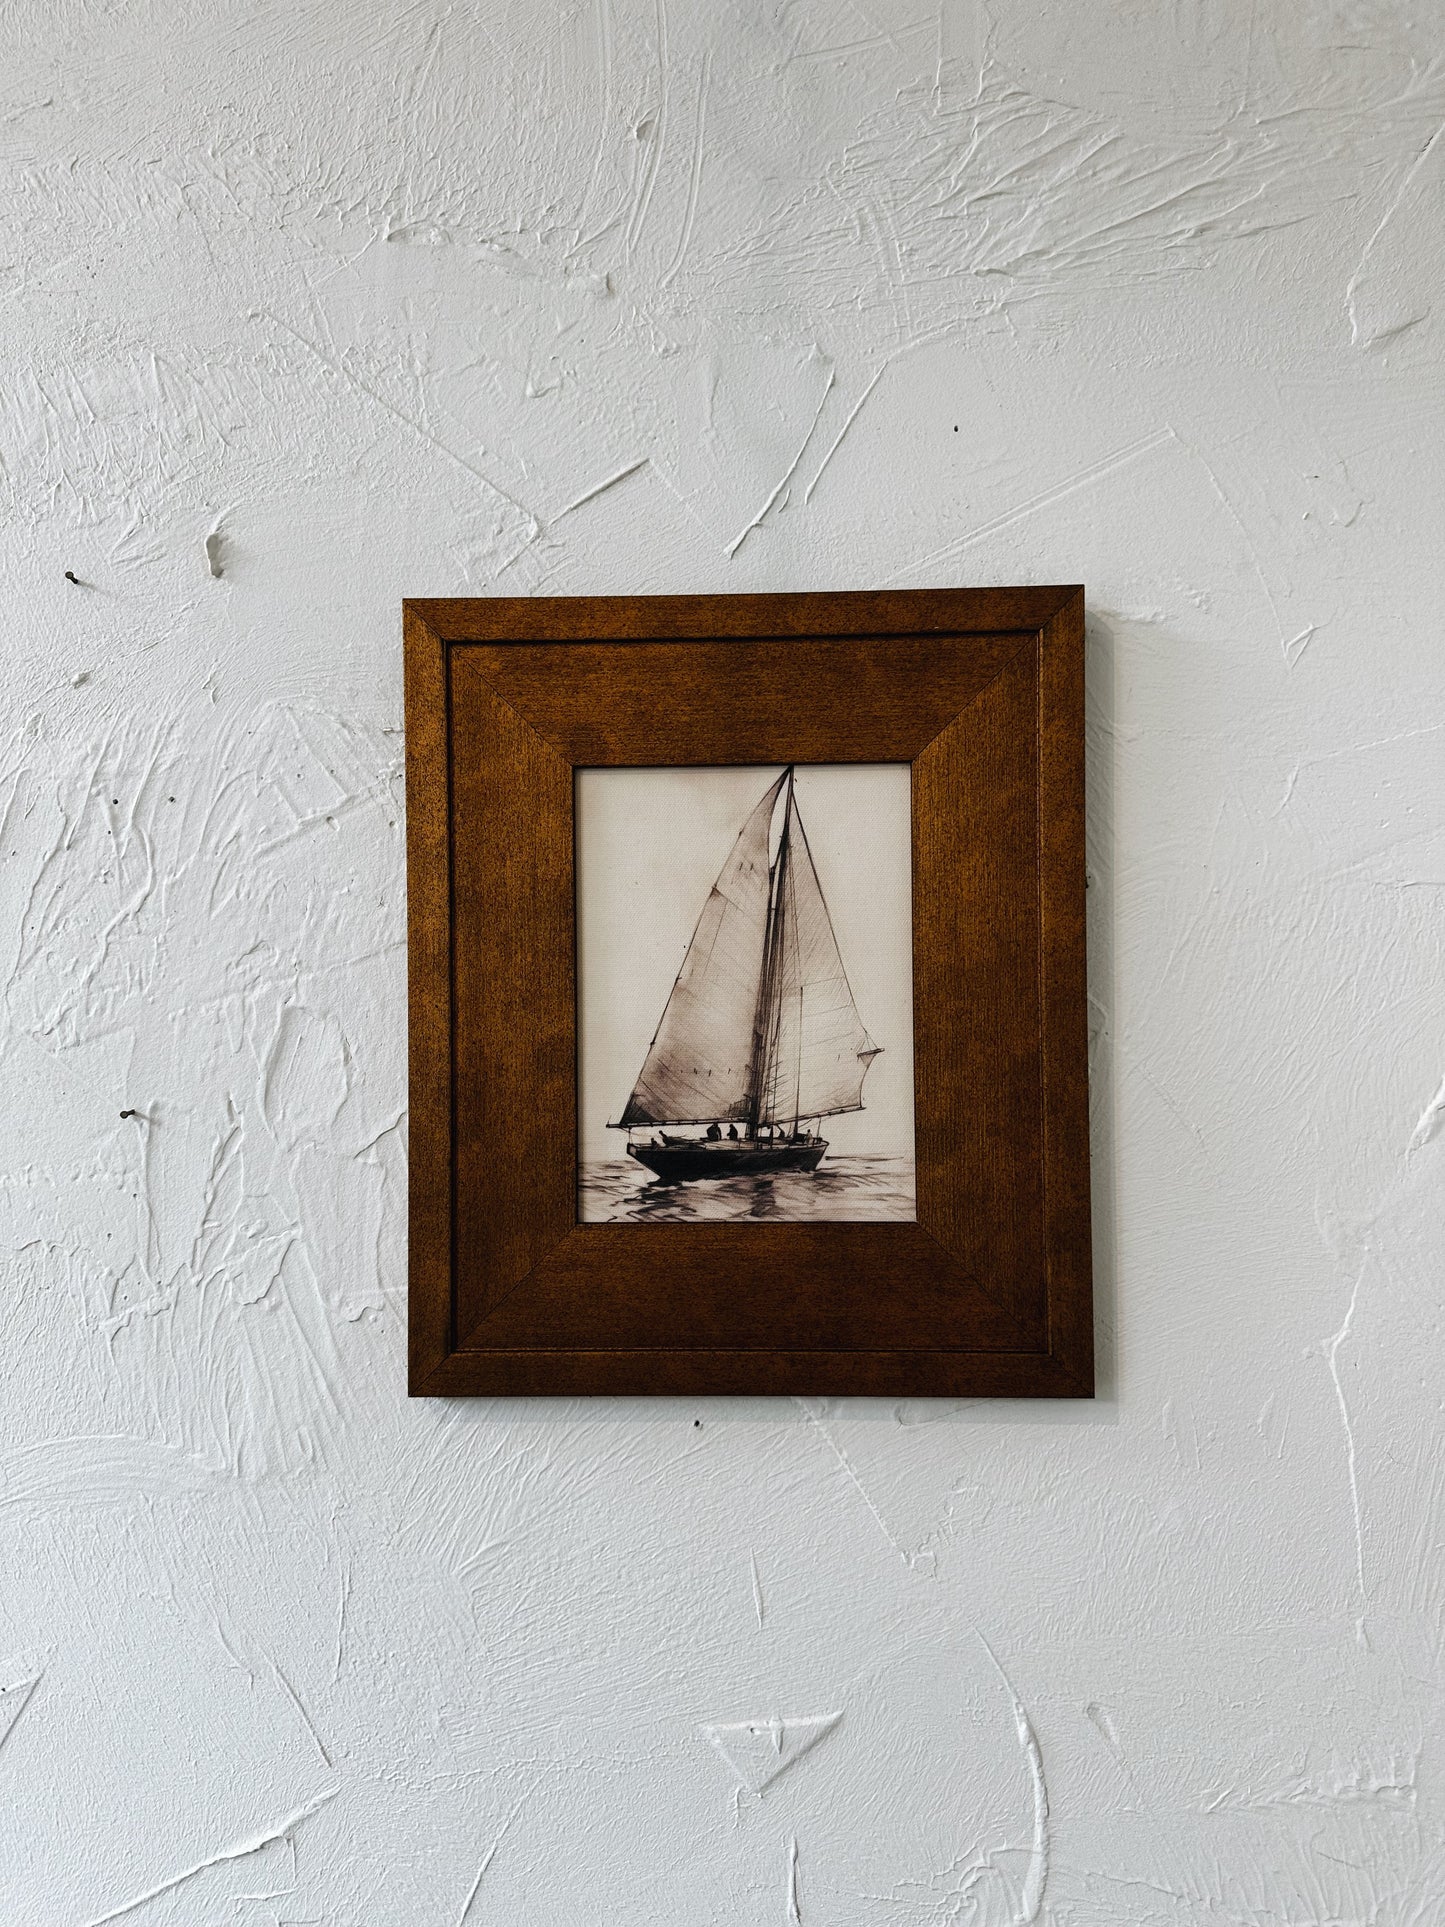 Wooden Sailboat Framed Picture